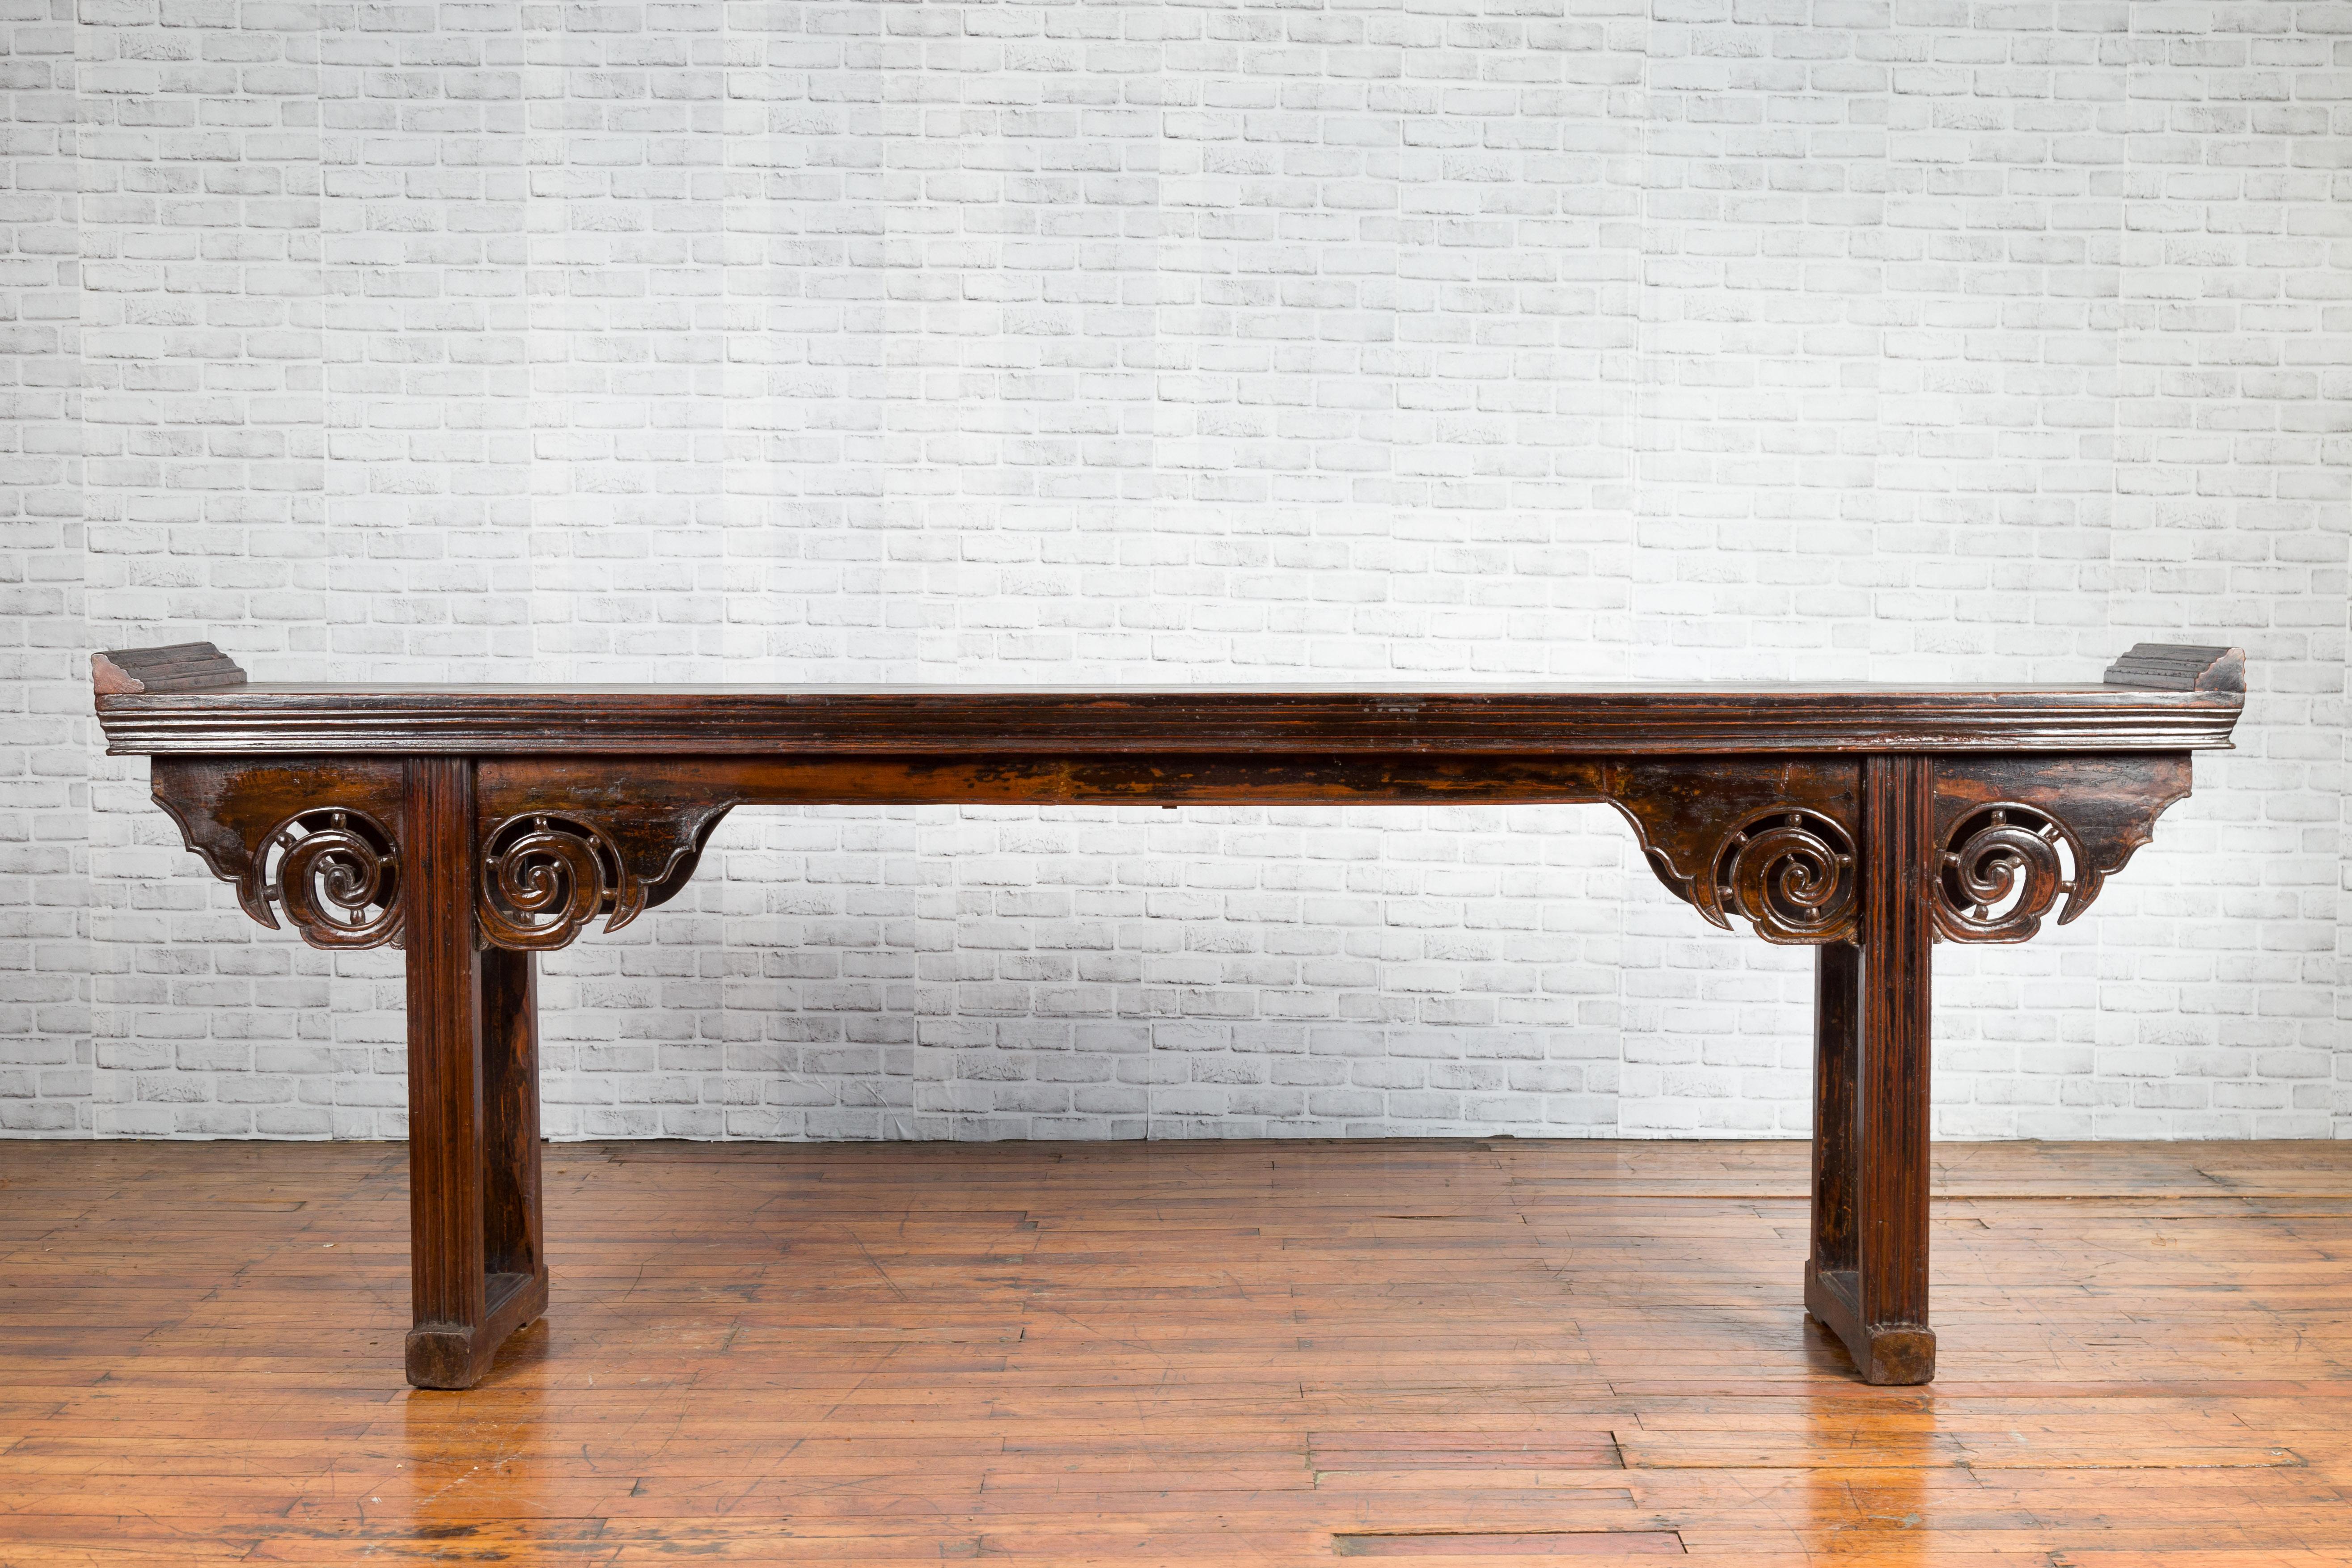 A Chinese Qing Dynasty period long altar table from the 19th century, with scrolling patterns, everted flanges and dark patina. Created in China during the Qing Dynasty, this altar console table draws our attention with its long proportions and